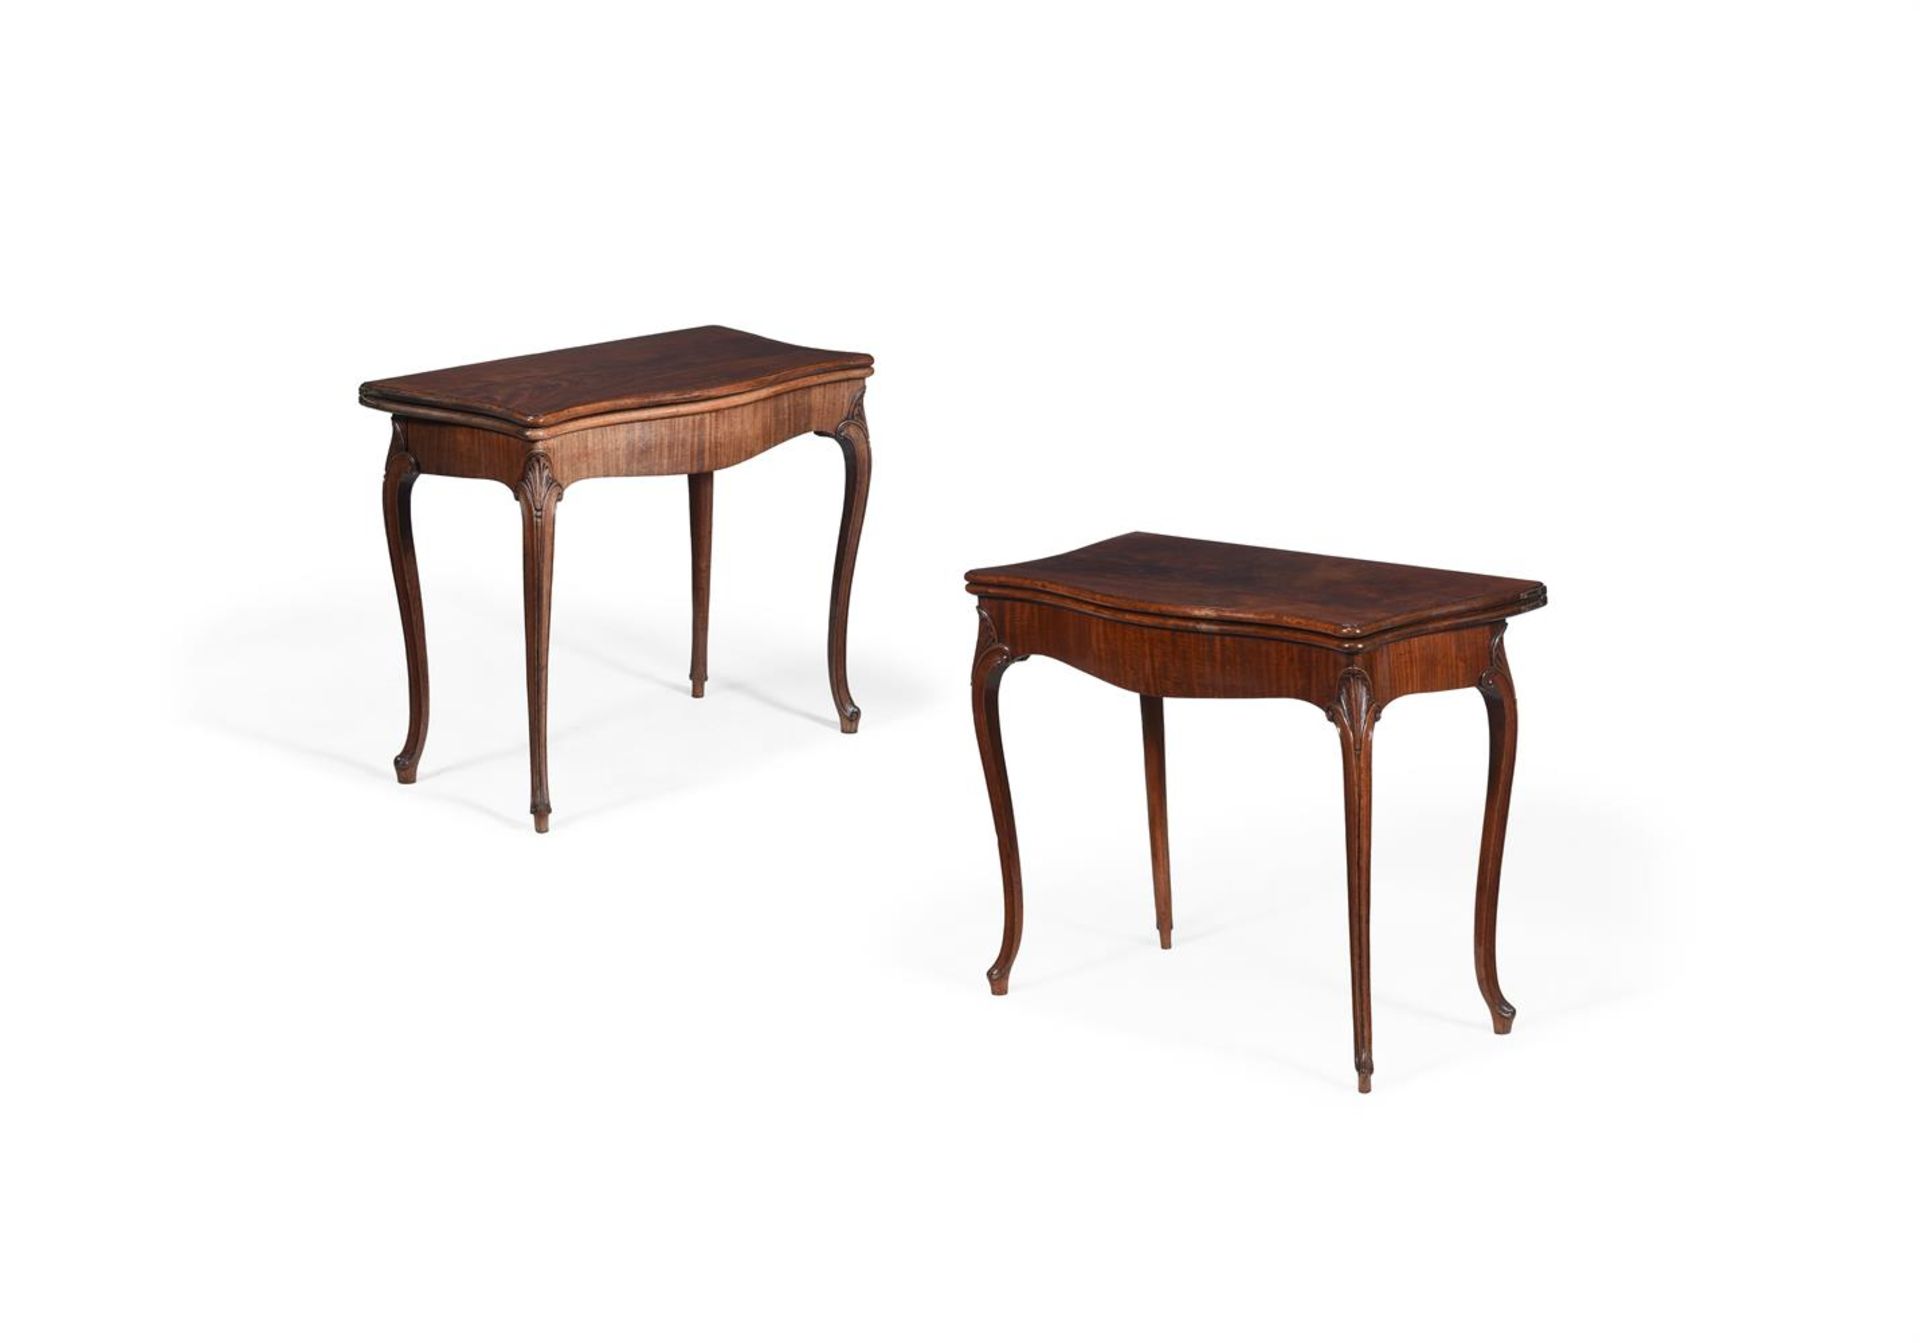 A CLOSELY MATCHED PAIR OF GEORGE III MAHOGANY AND INLAID TEA TABLES, CIRCA 1780